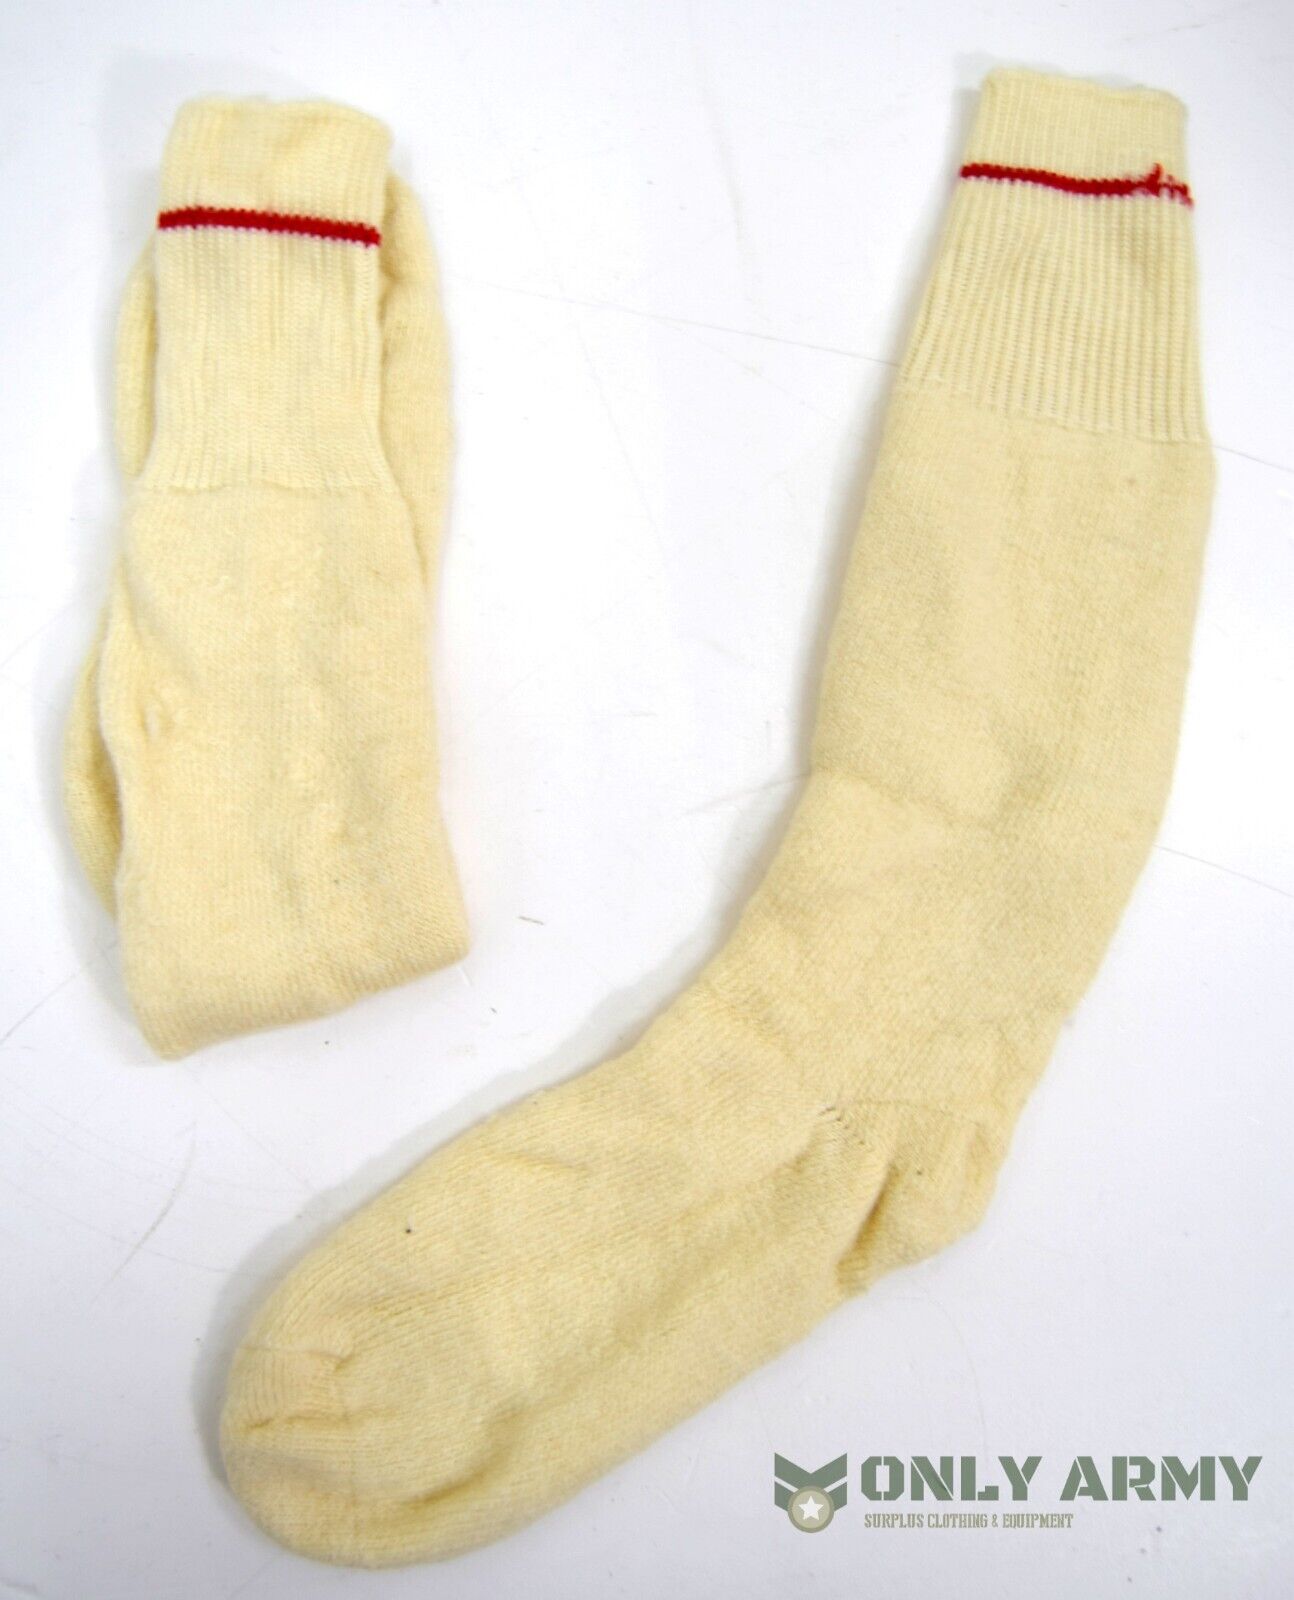 British Army Issue Arctic Socks Issued Grade 1 Military Wool Sock Cold Weather